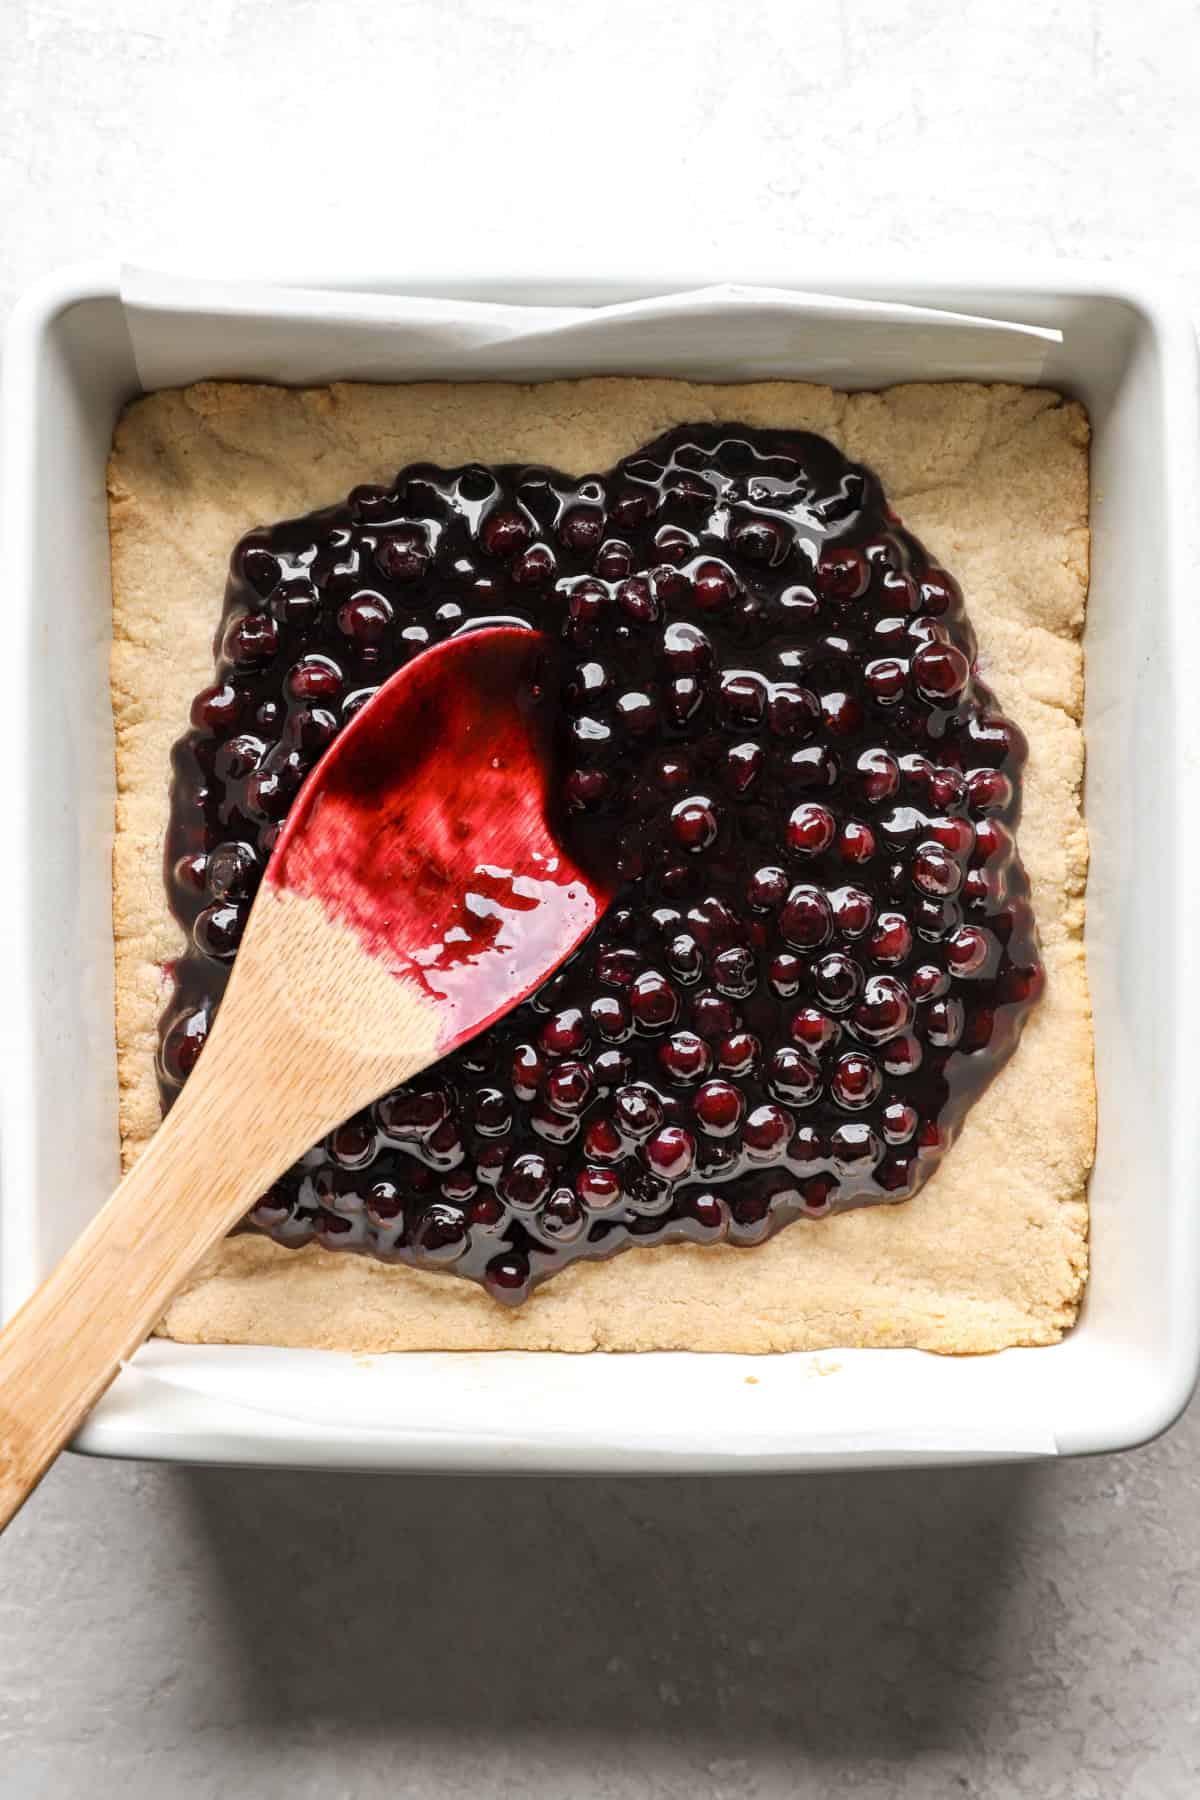 Blueberry filling being spread over crust.